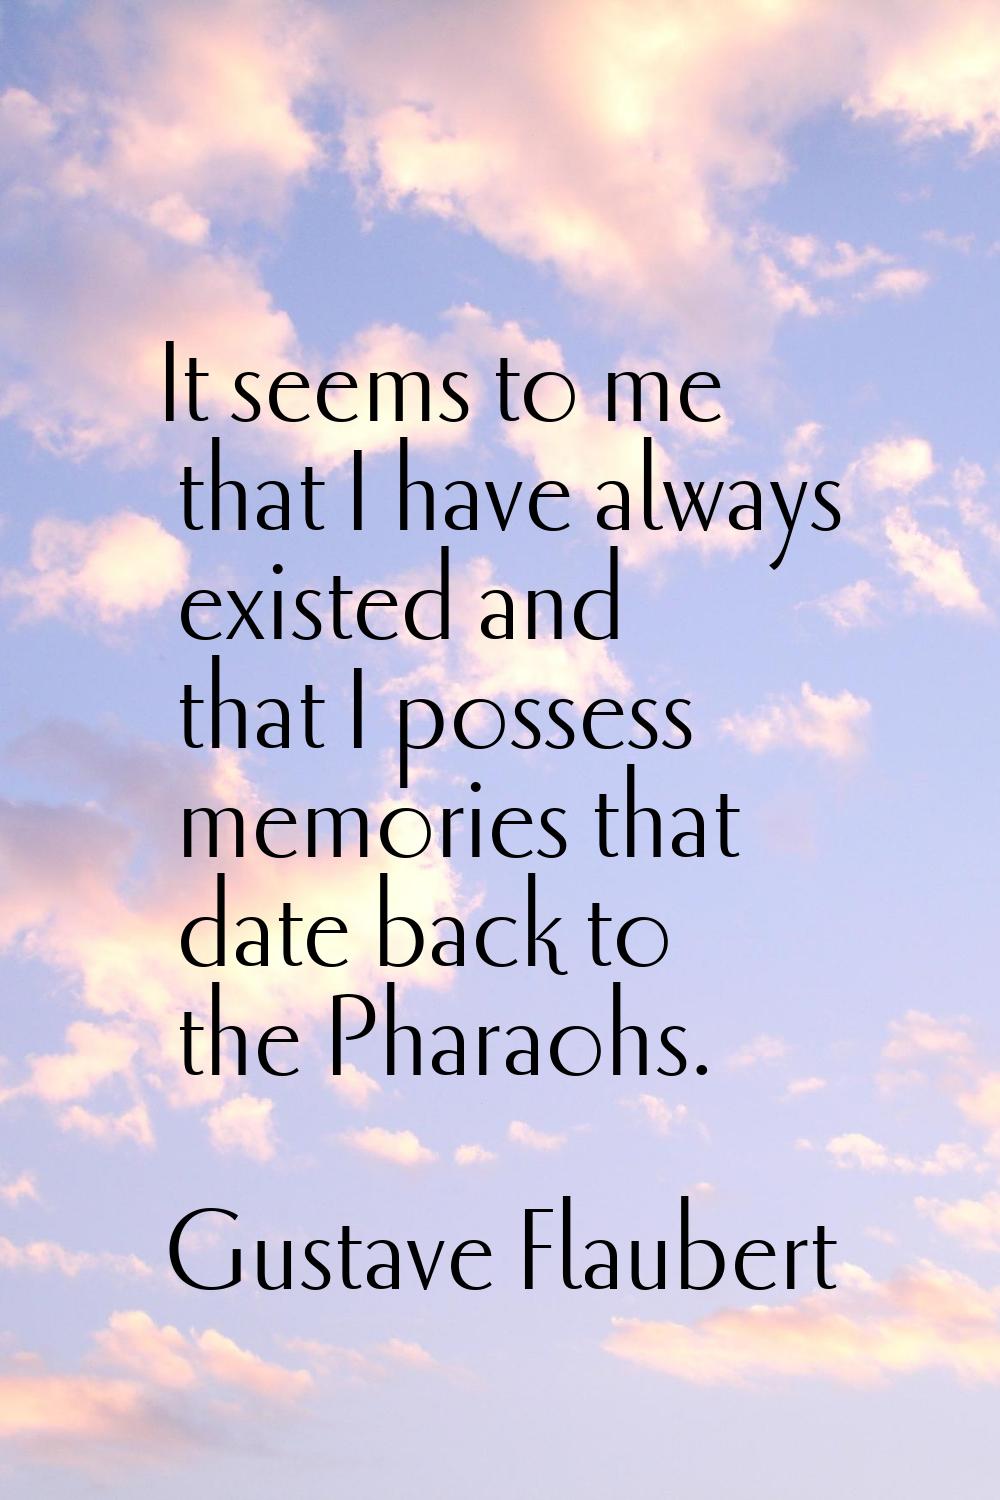 It seems to me that I have always existed and that I possess memories that date back to the Pharaoh